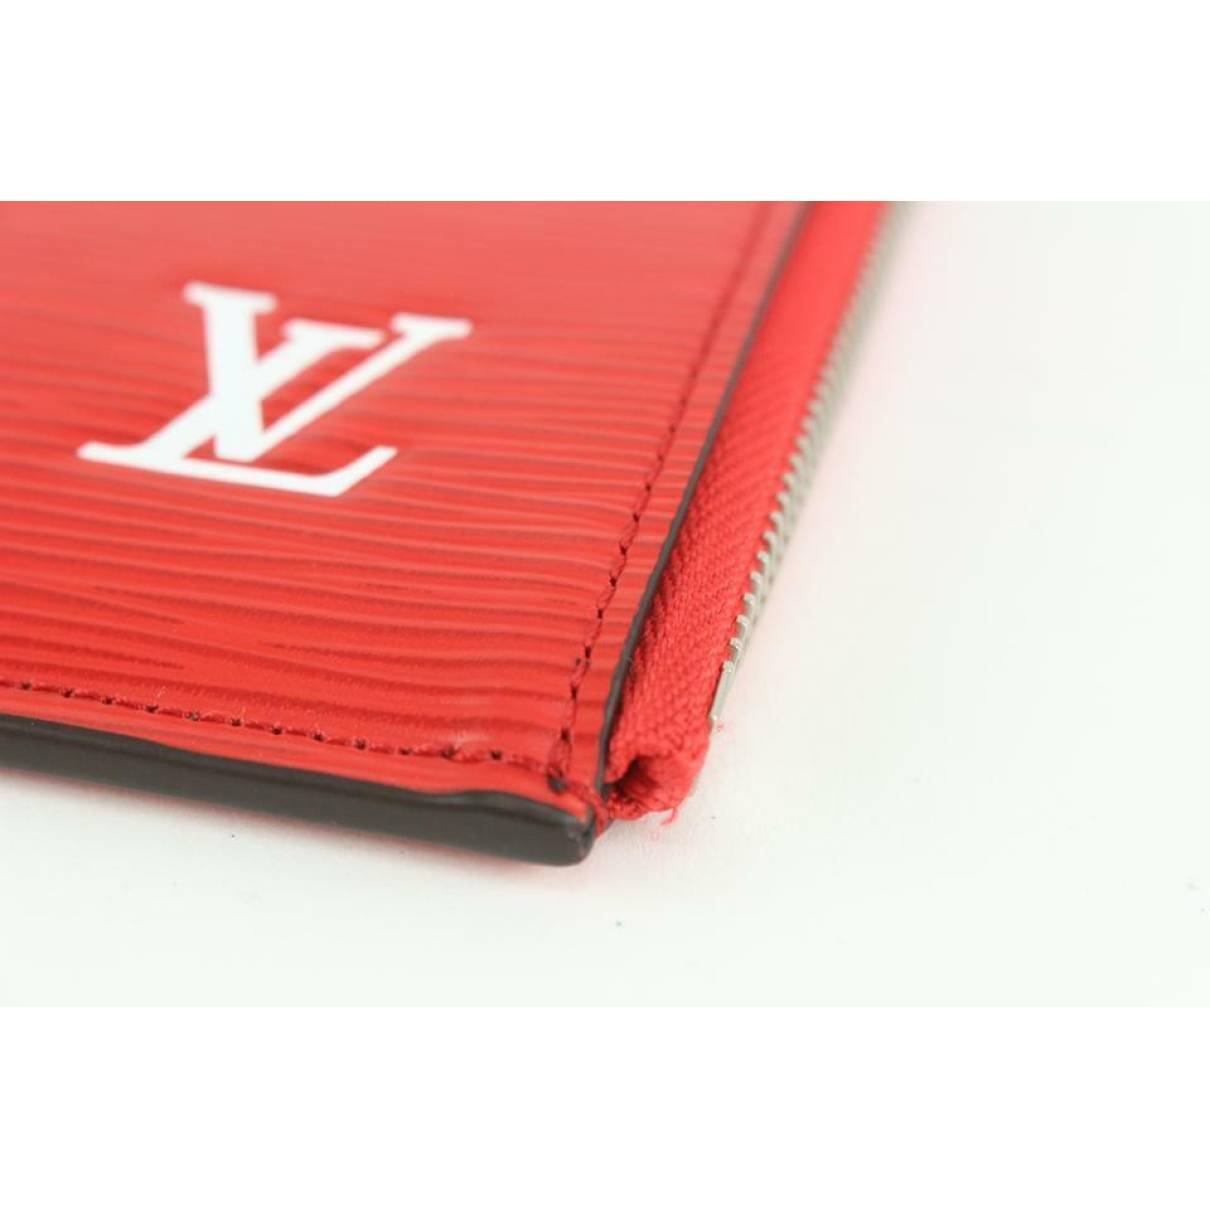 Womens new LV Supreme Wallet